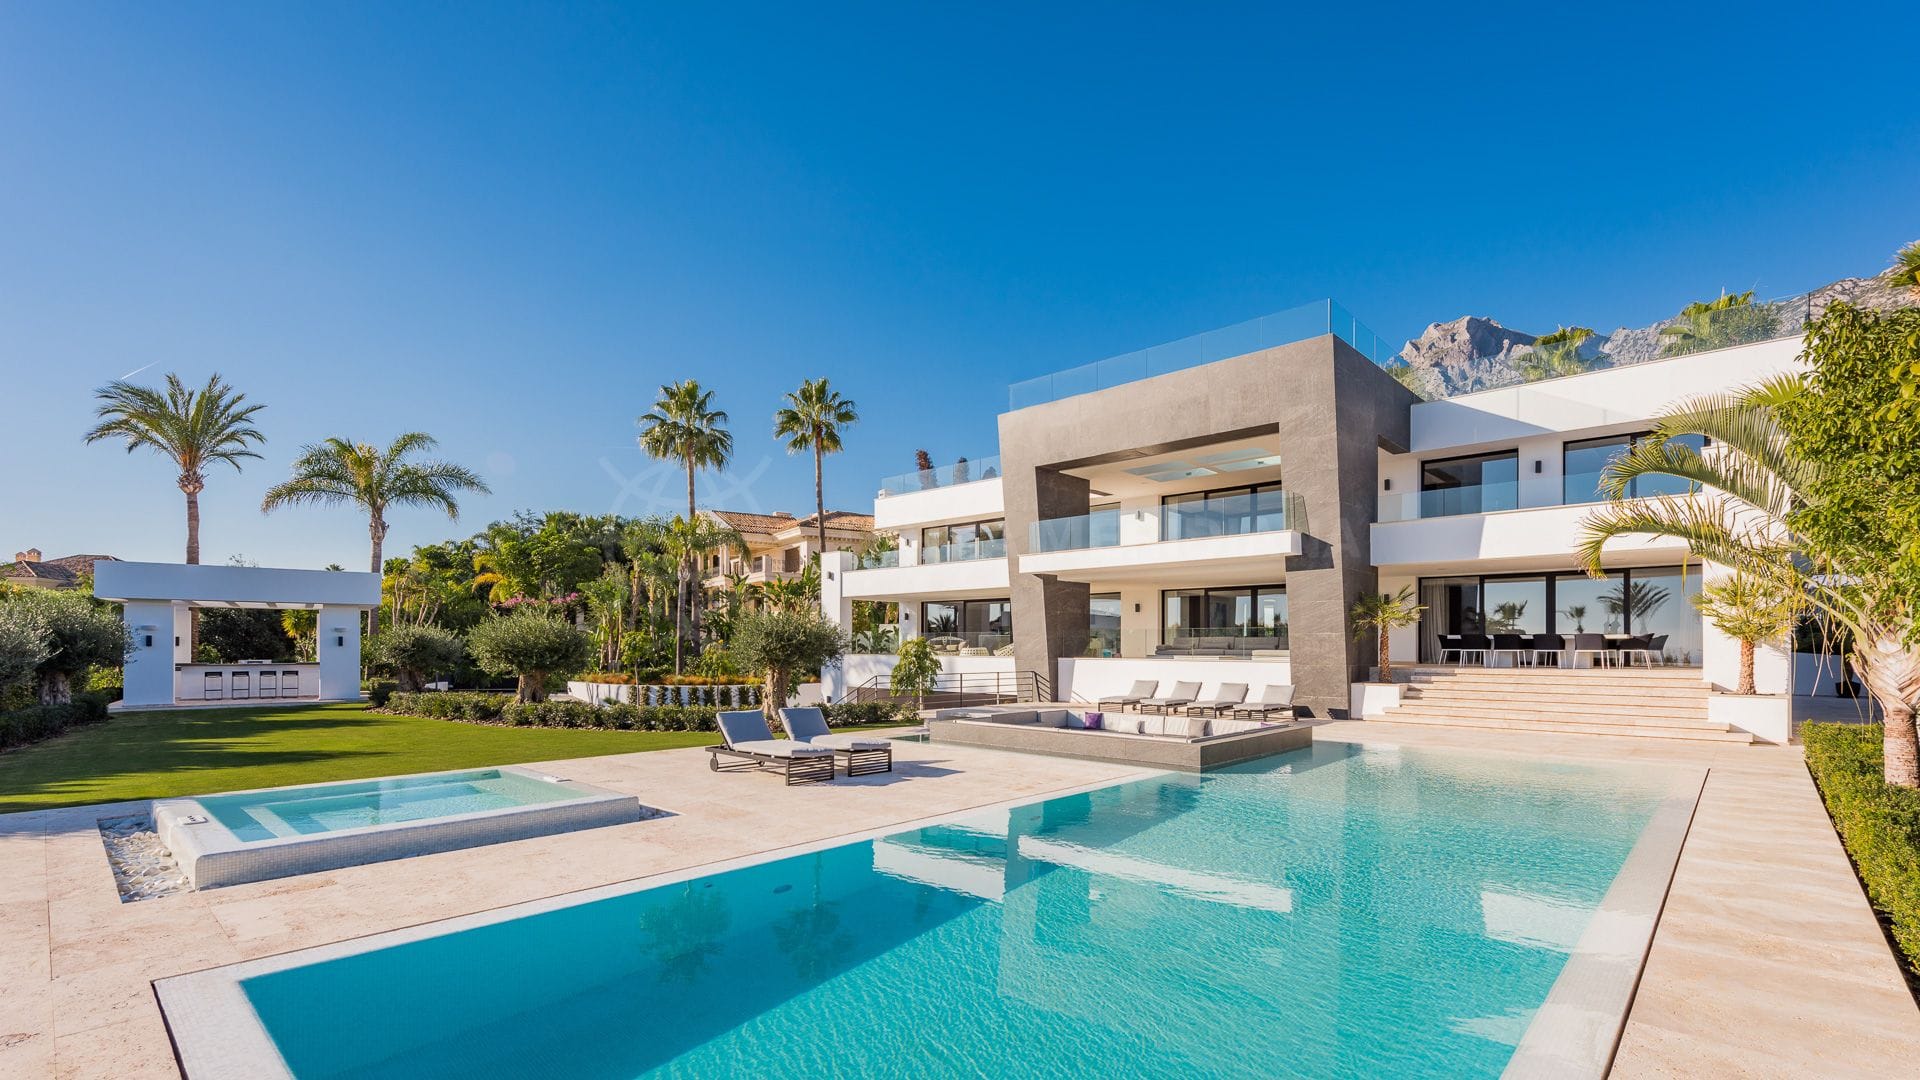 The costs of selling a property on the Costa del Sol, part 2